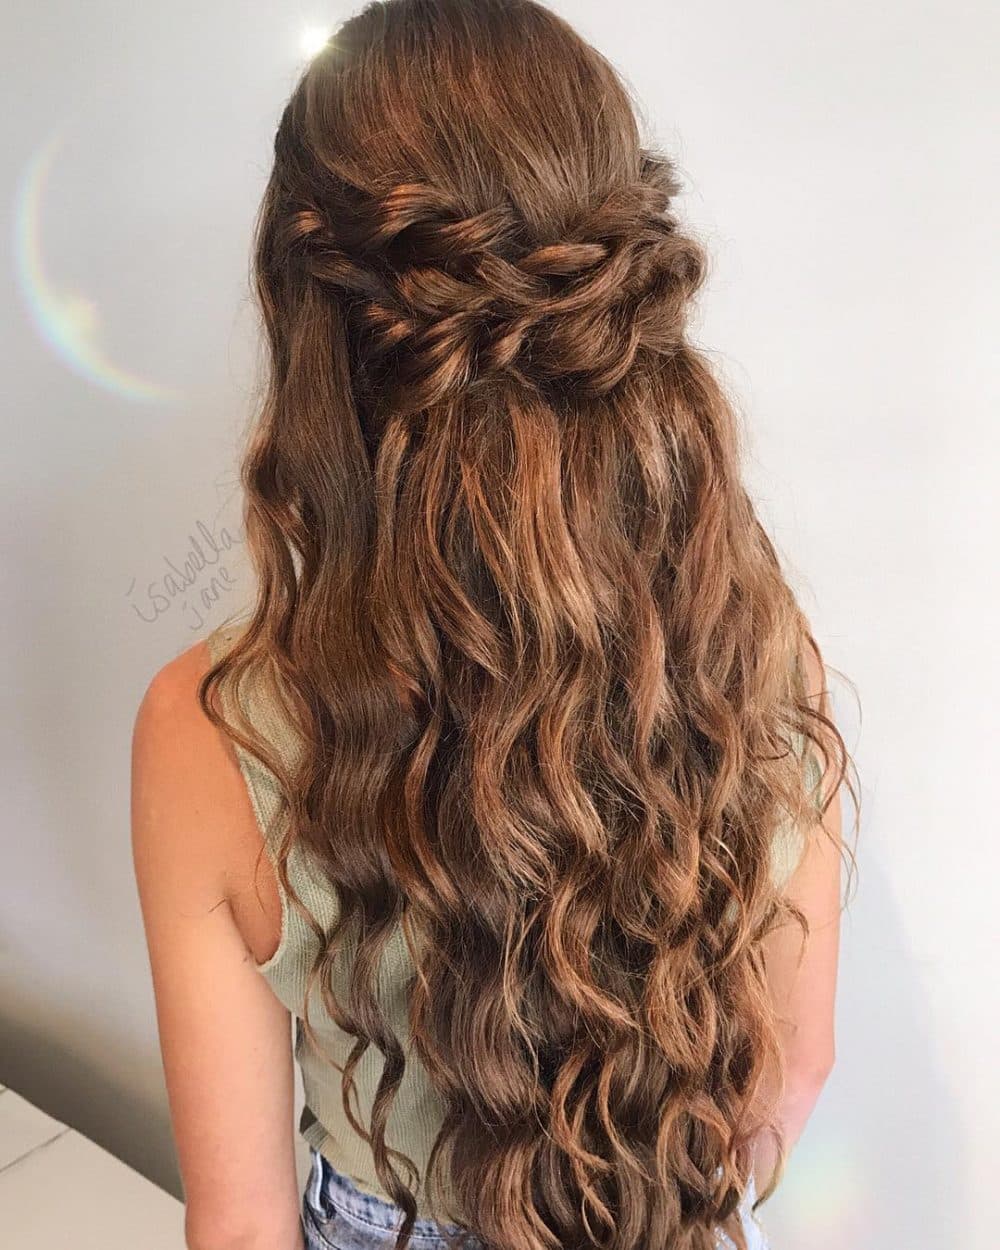 Cute Half Up Half Down Quinceanera Hairstyle with Beach Waves